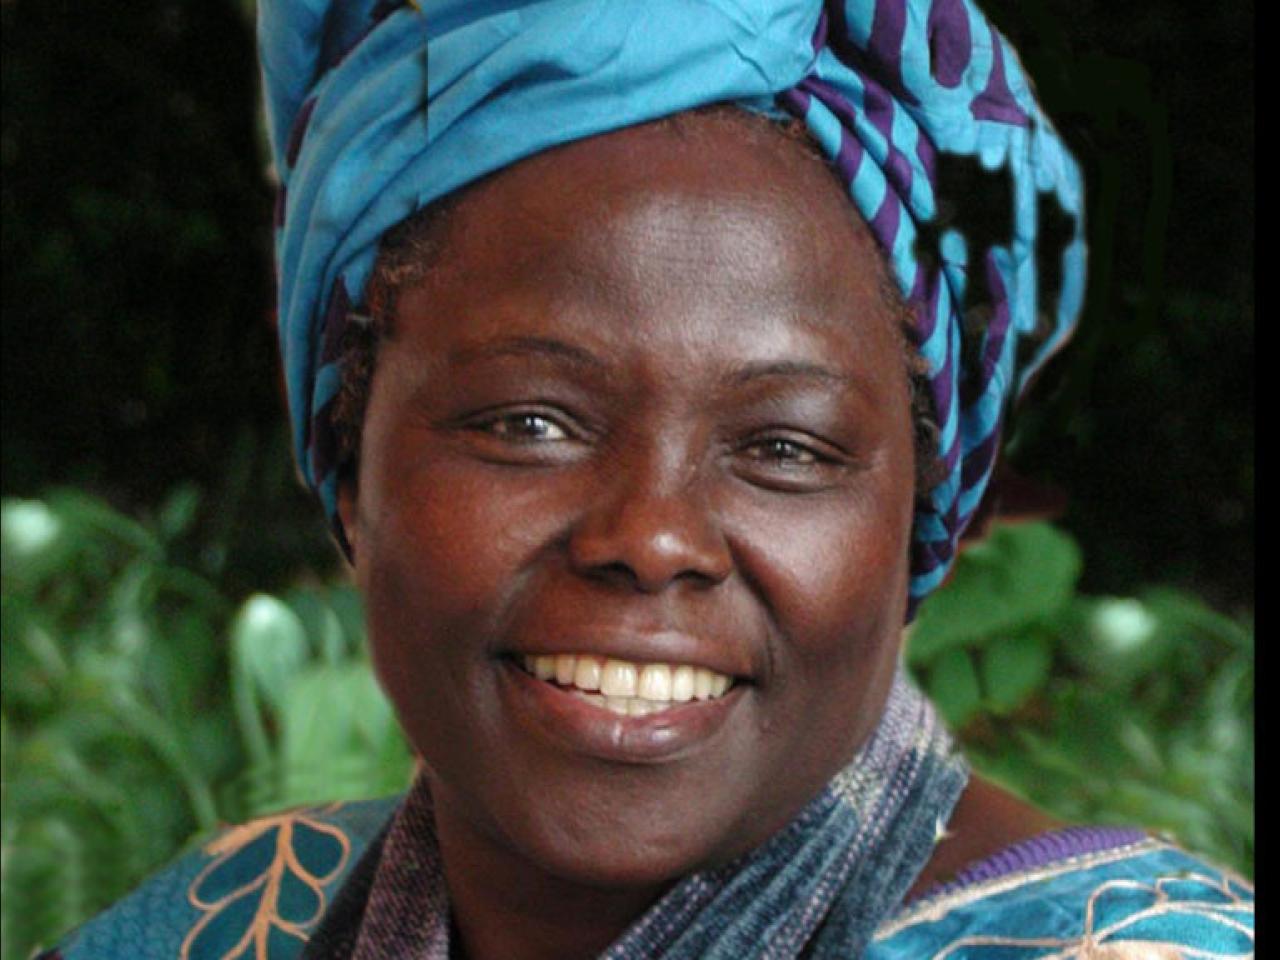 A headshot of Wangari Maathai, the first African woman to win the Nobel Peace Prize. She stares directly in the camera and is smiling. She is wearing a colorful blue top and scarf and a blue head covering.